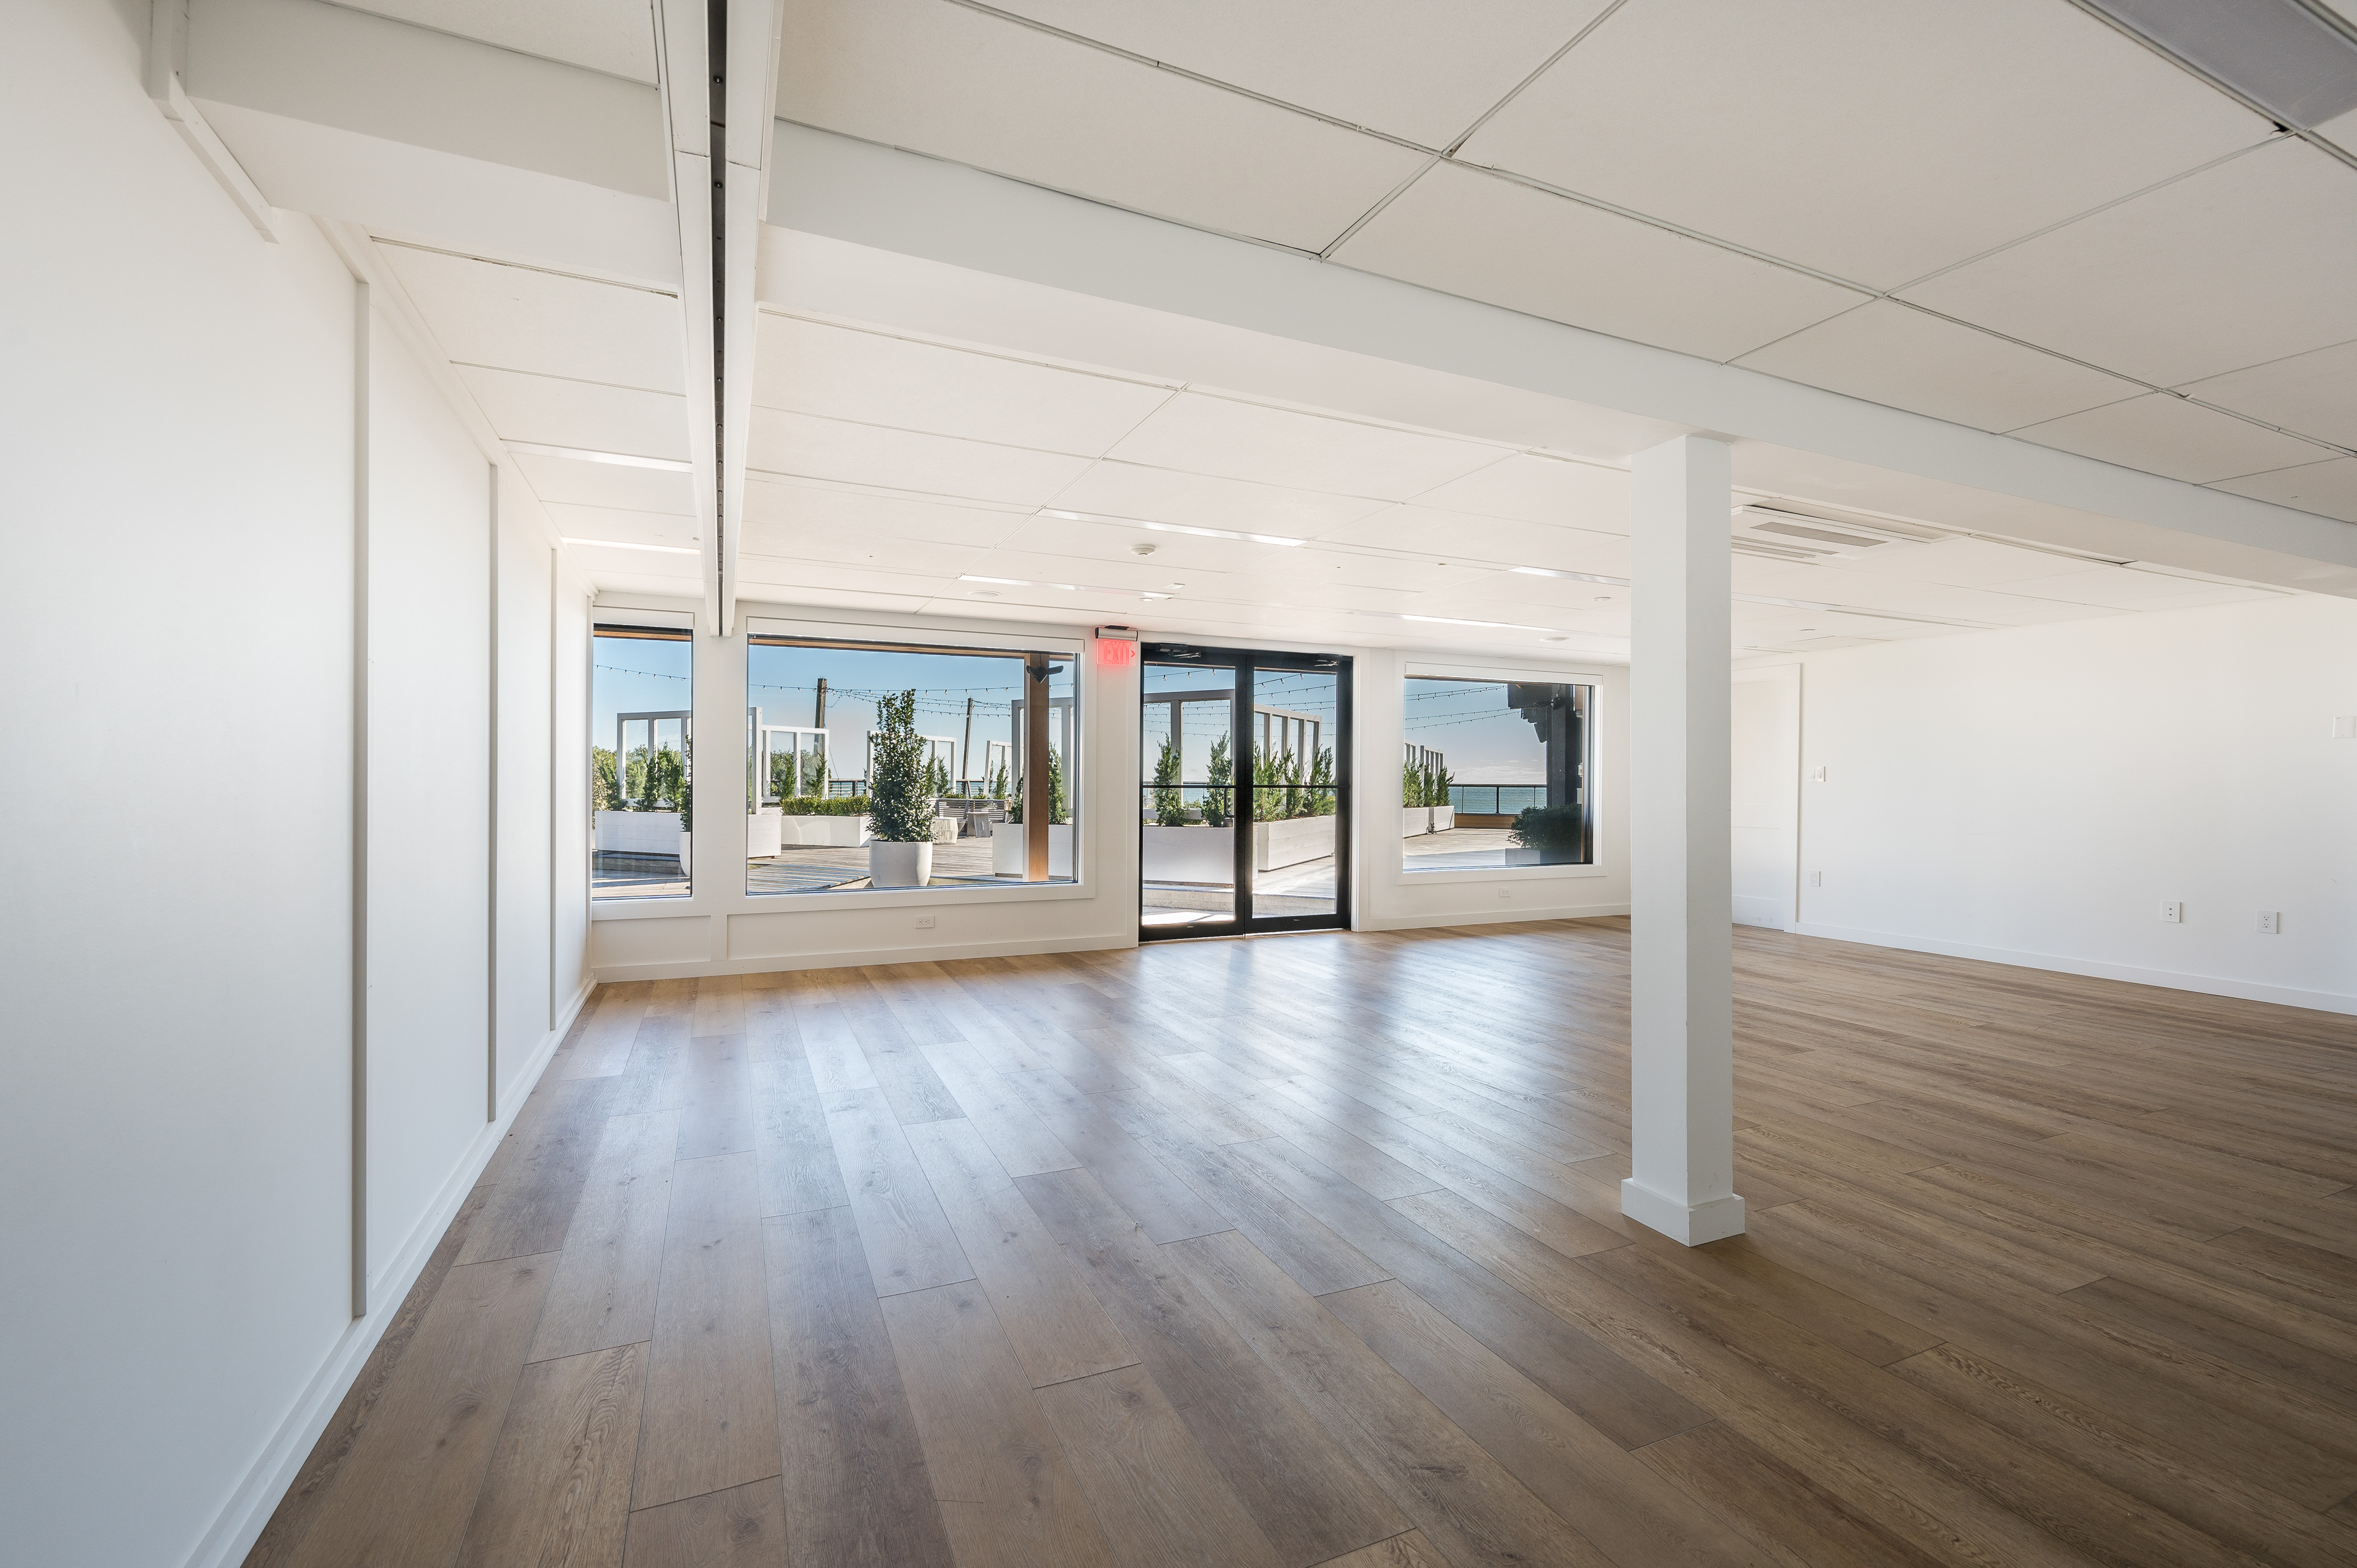 Latitude meeting venue with dark wood flooring, white walls and pillar, large windows with ocean view.